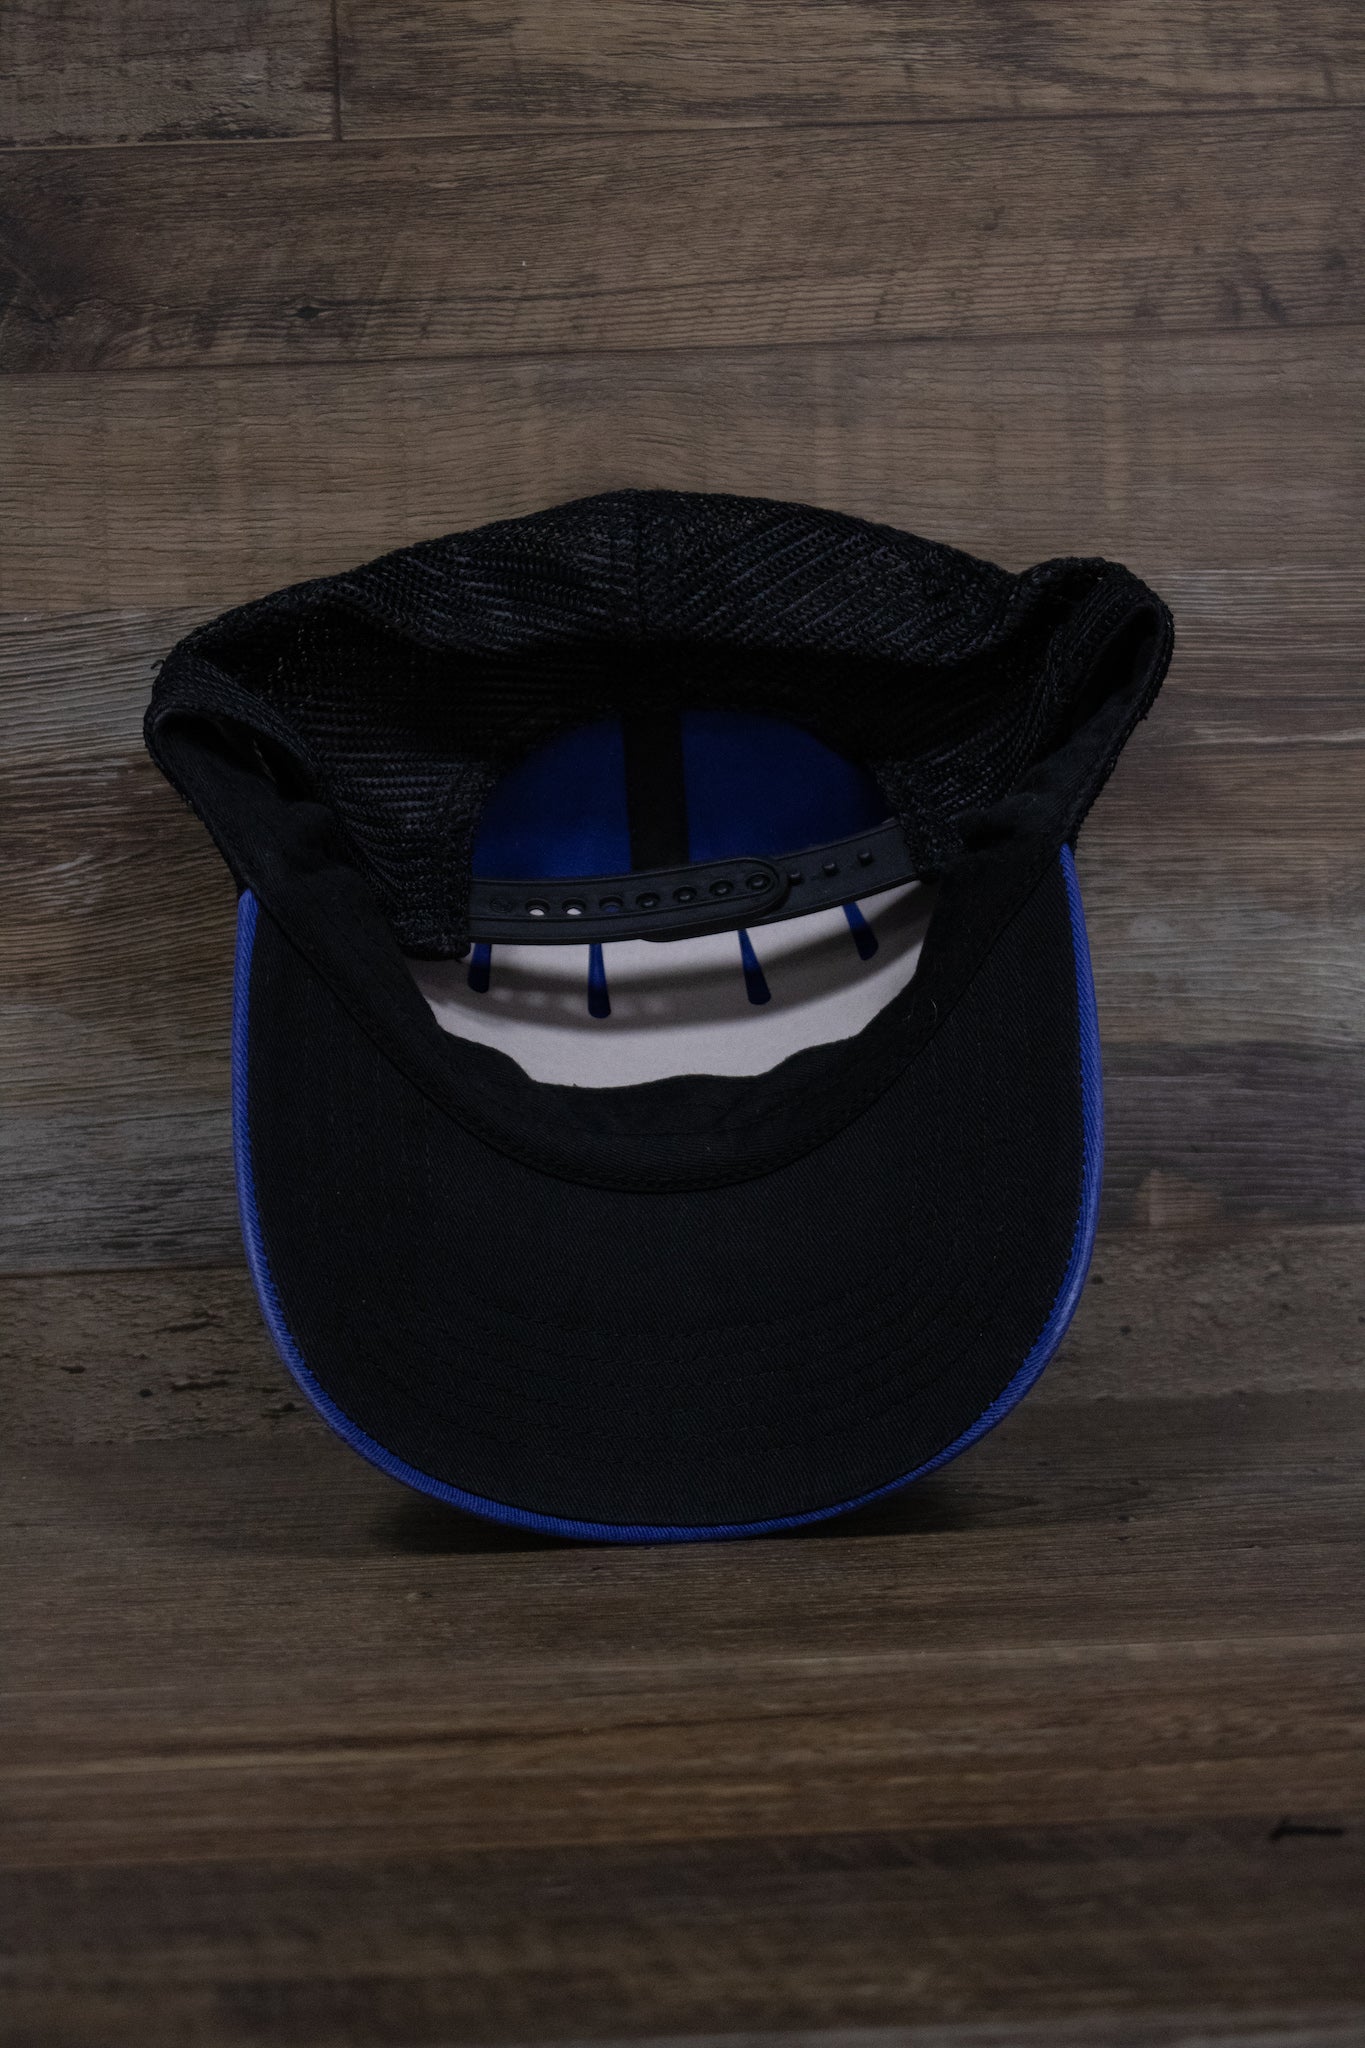 The underside of the Kentucky Wildcats mesh back dad hat shows a black underbrim and the logos for '47 Brand and Official College Products